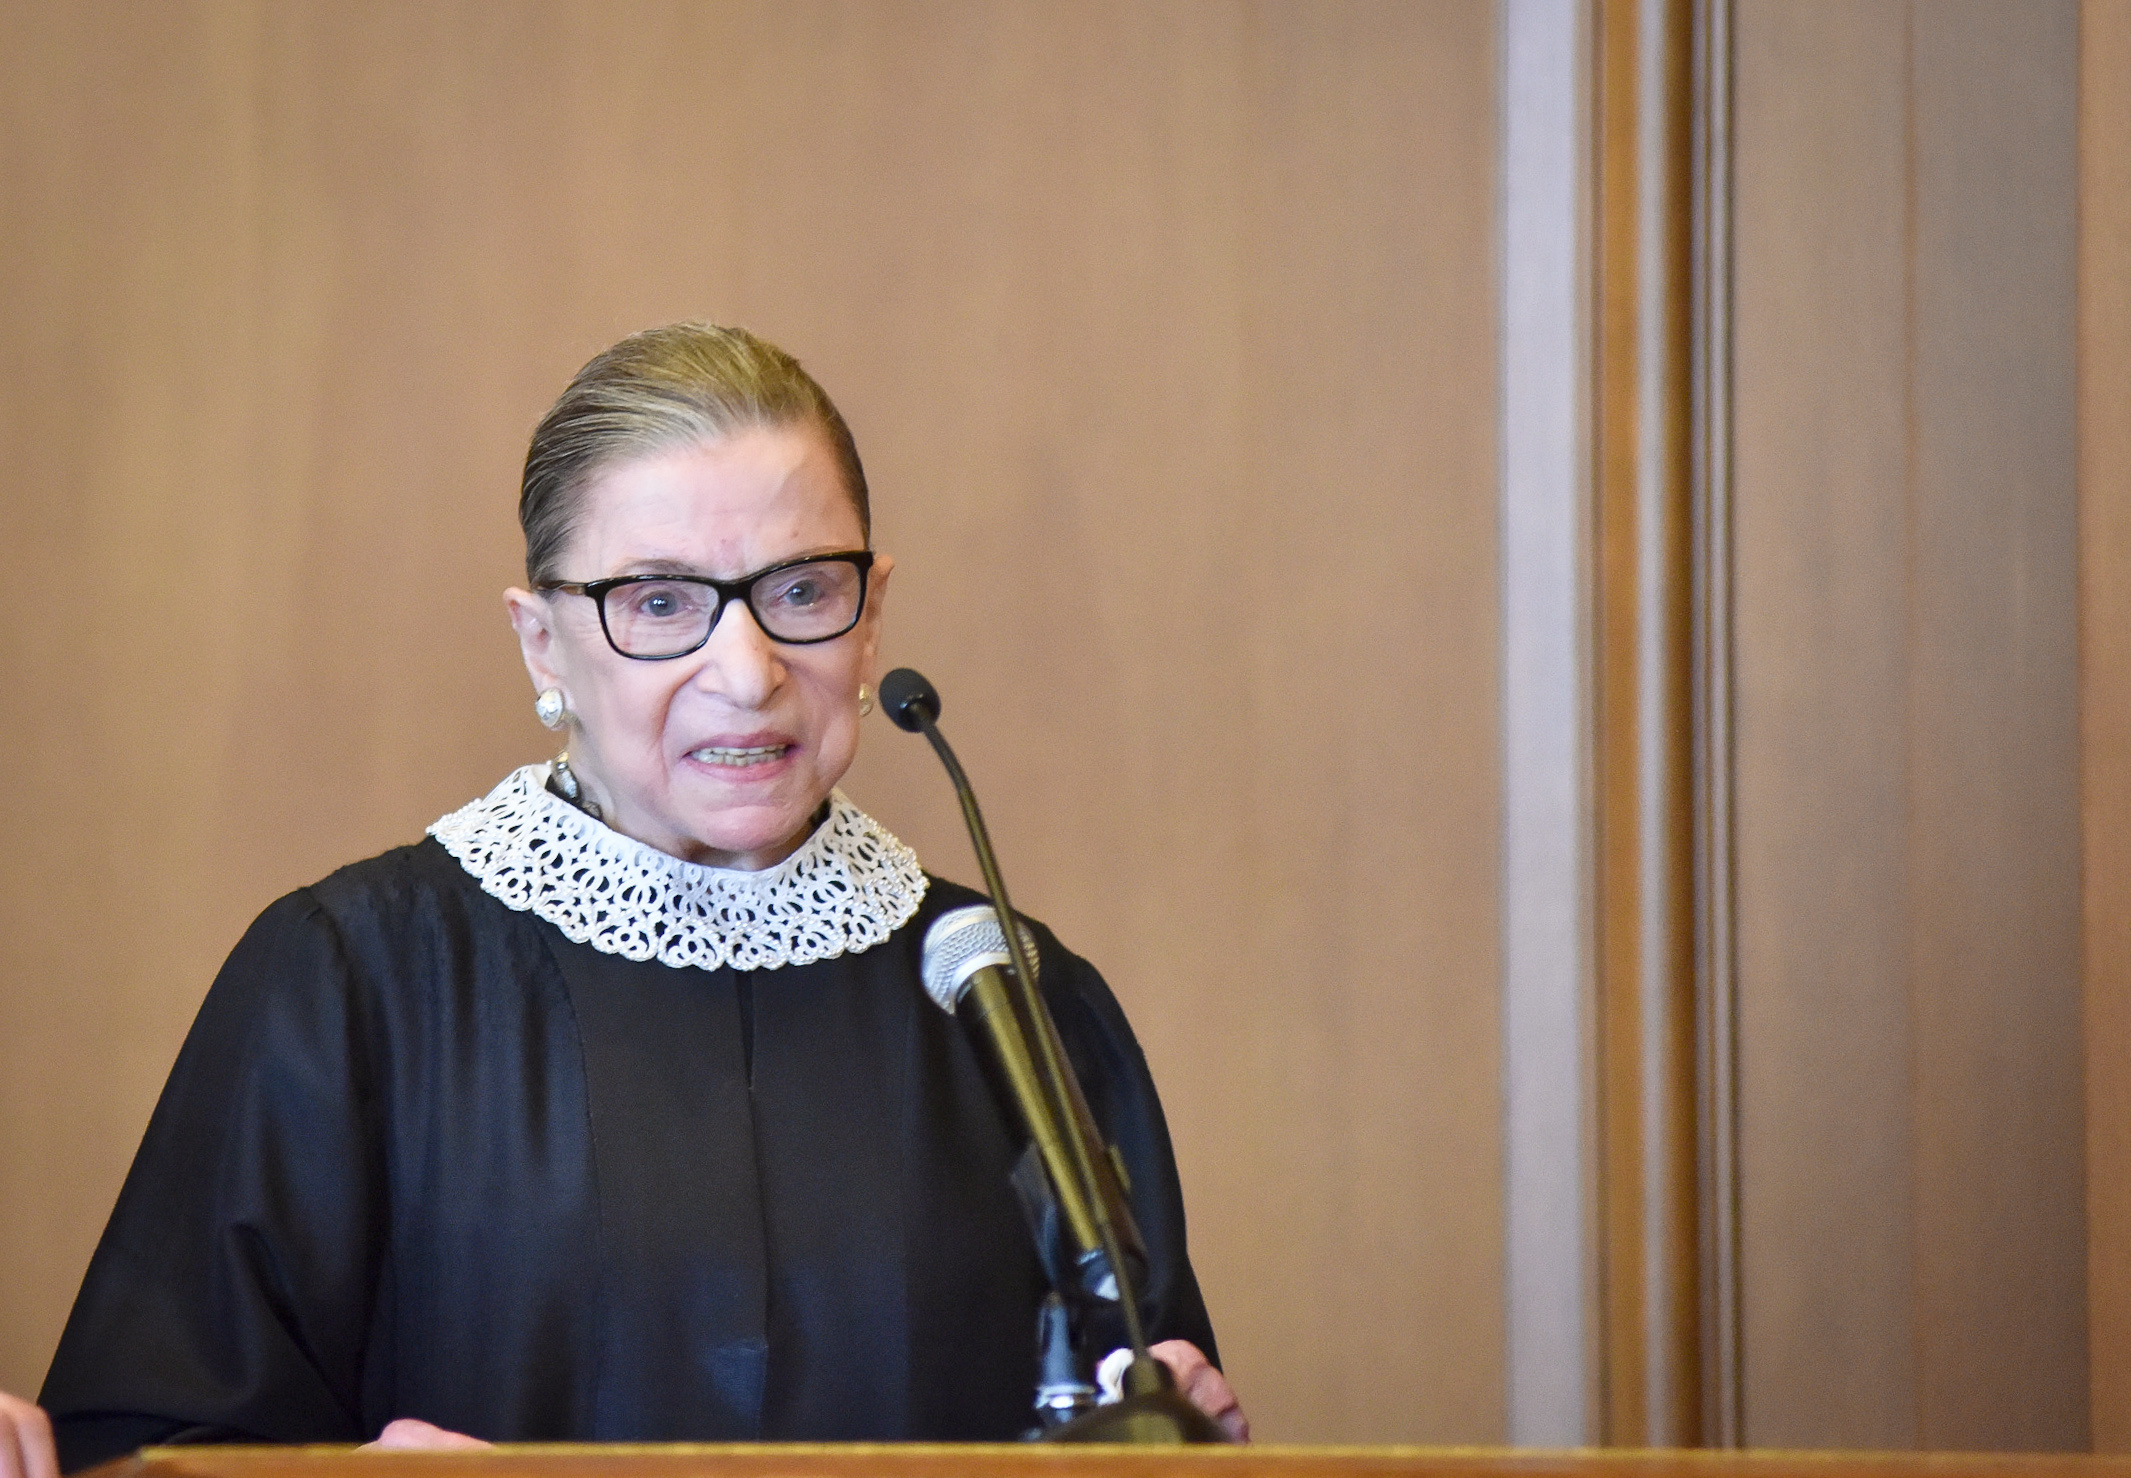 After receiving three weeks of radiation – which causes cancer – Ruth Bader Ginsburg now claims to be “cancer free” – a status the cancer industry says does not exist